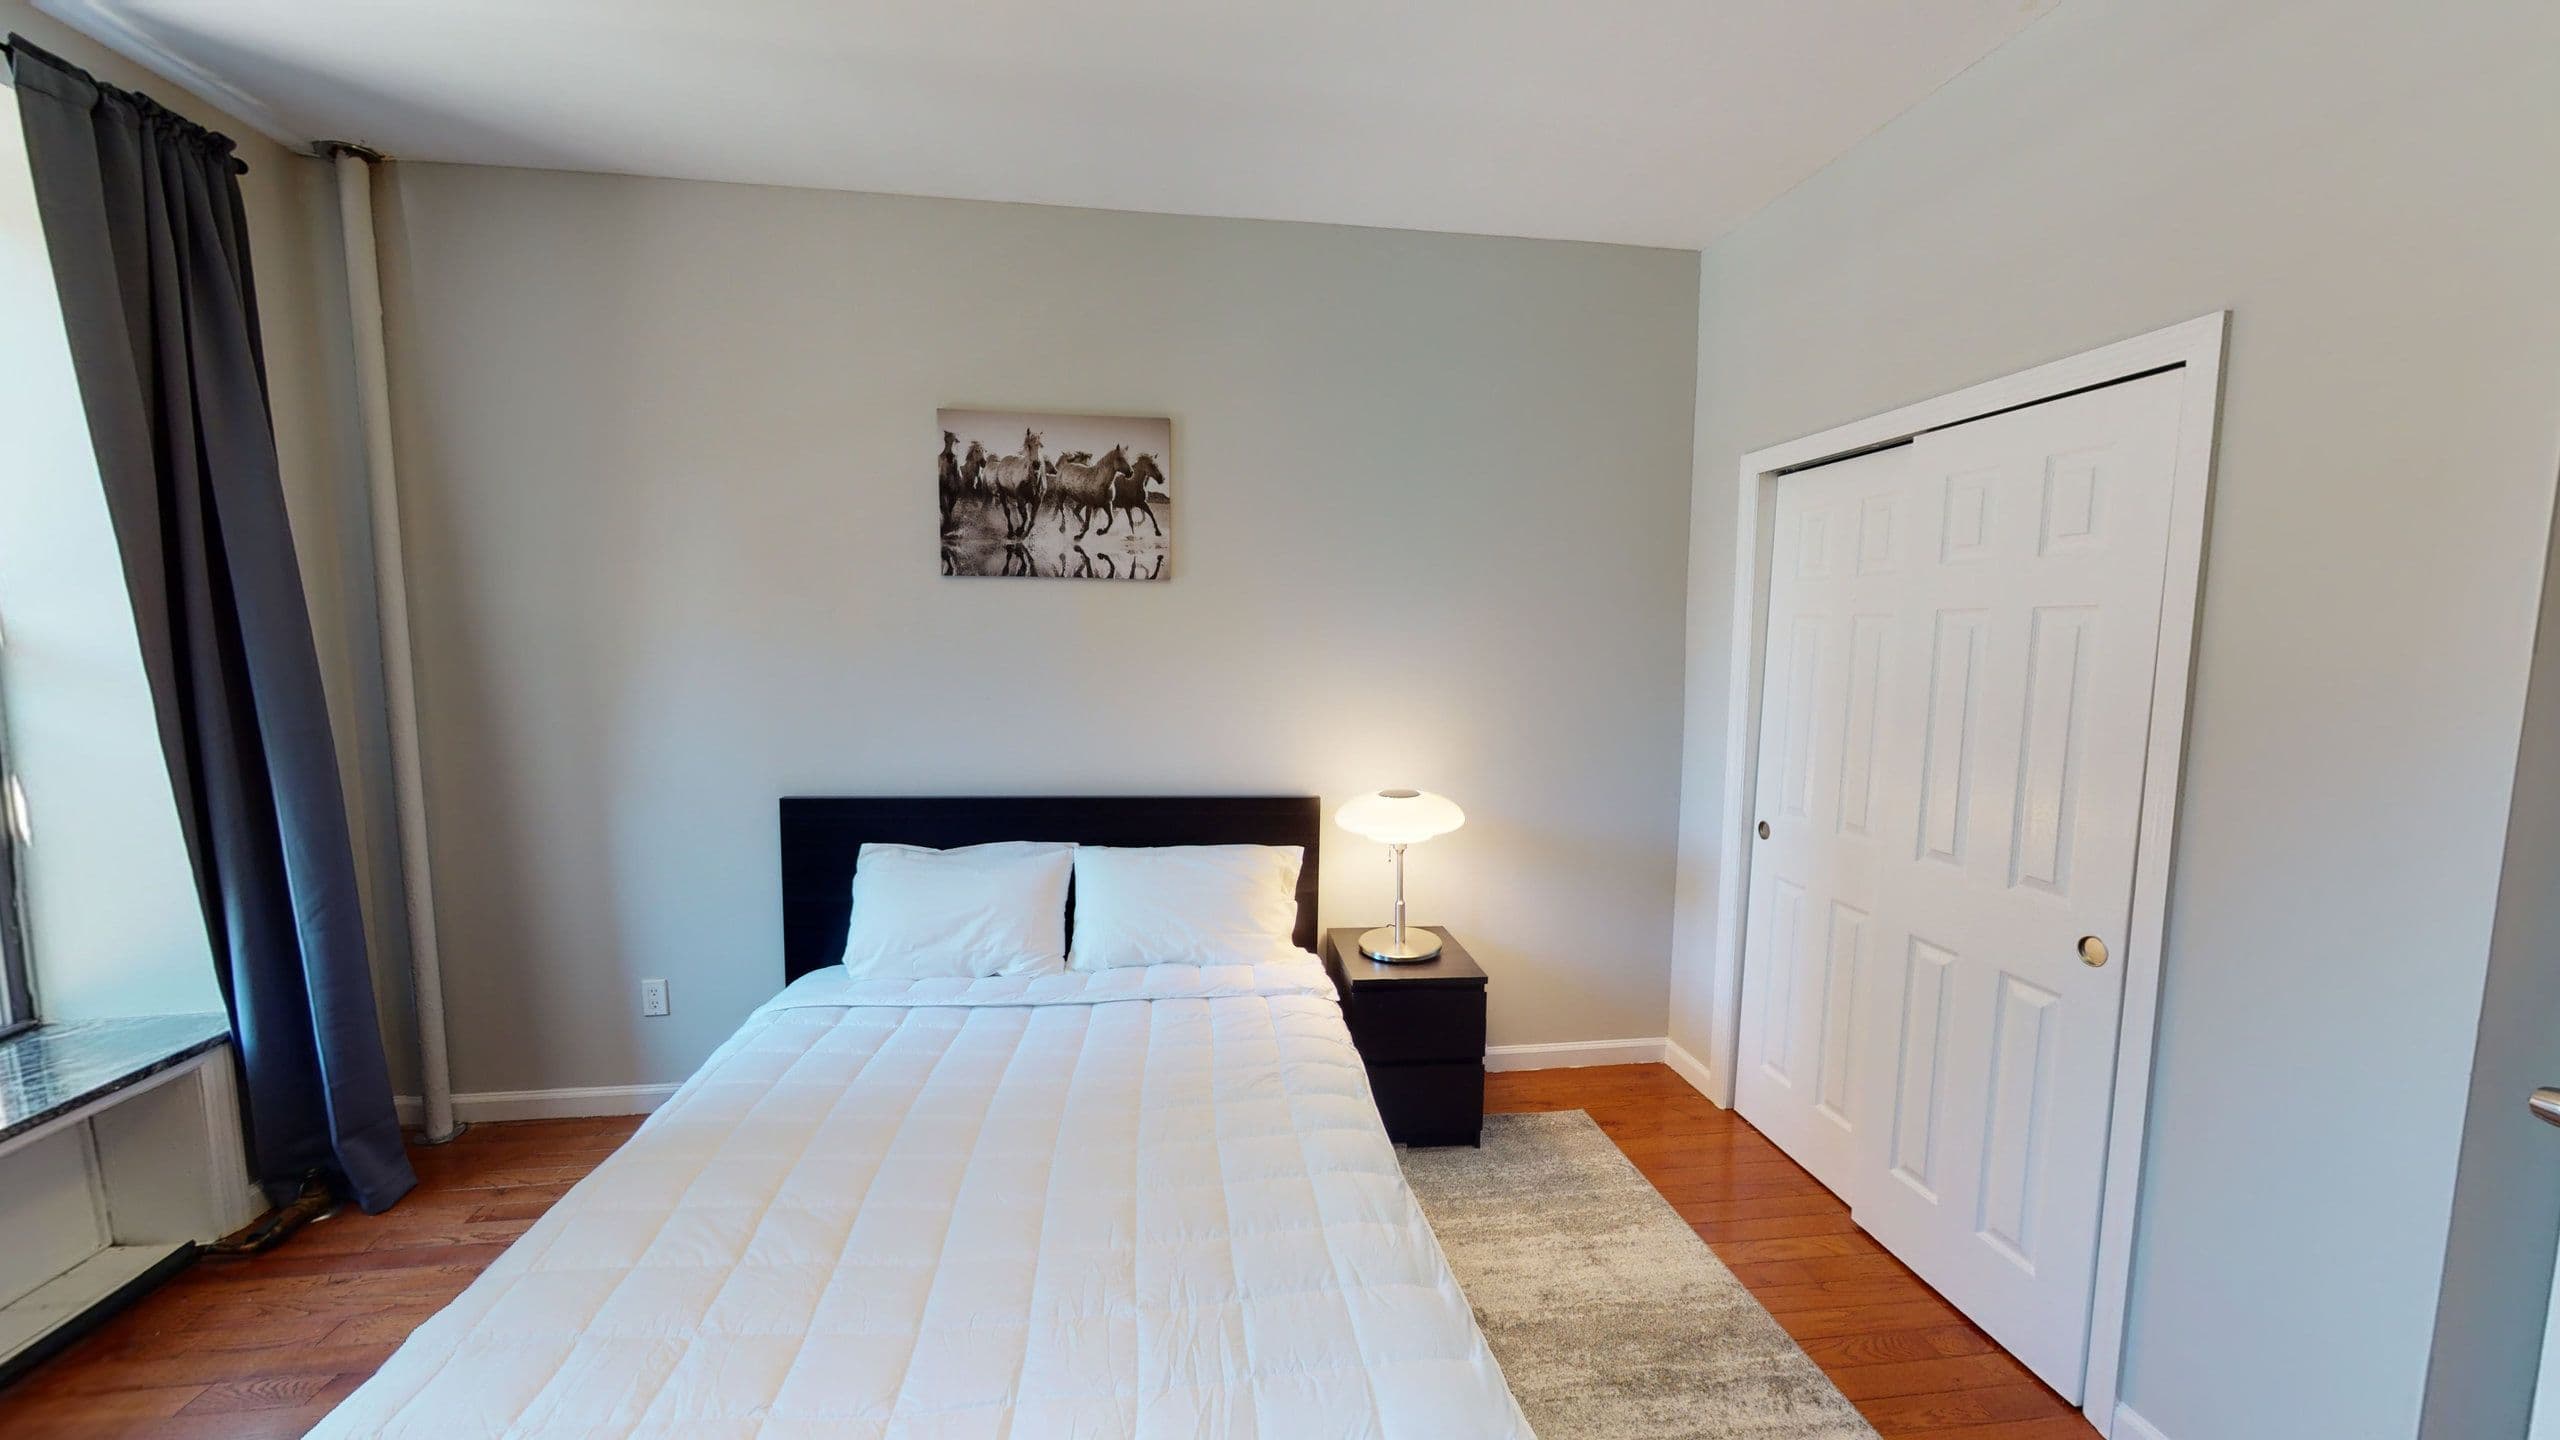 Photo 2 of #1590: Queen Bedroom A at June Homes